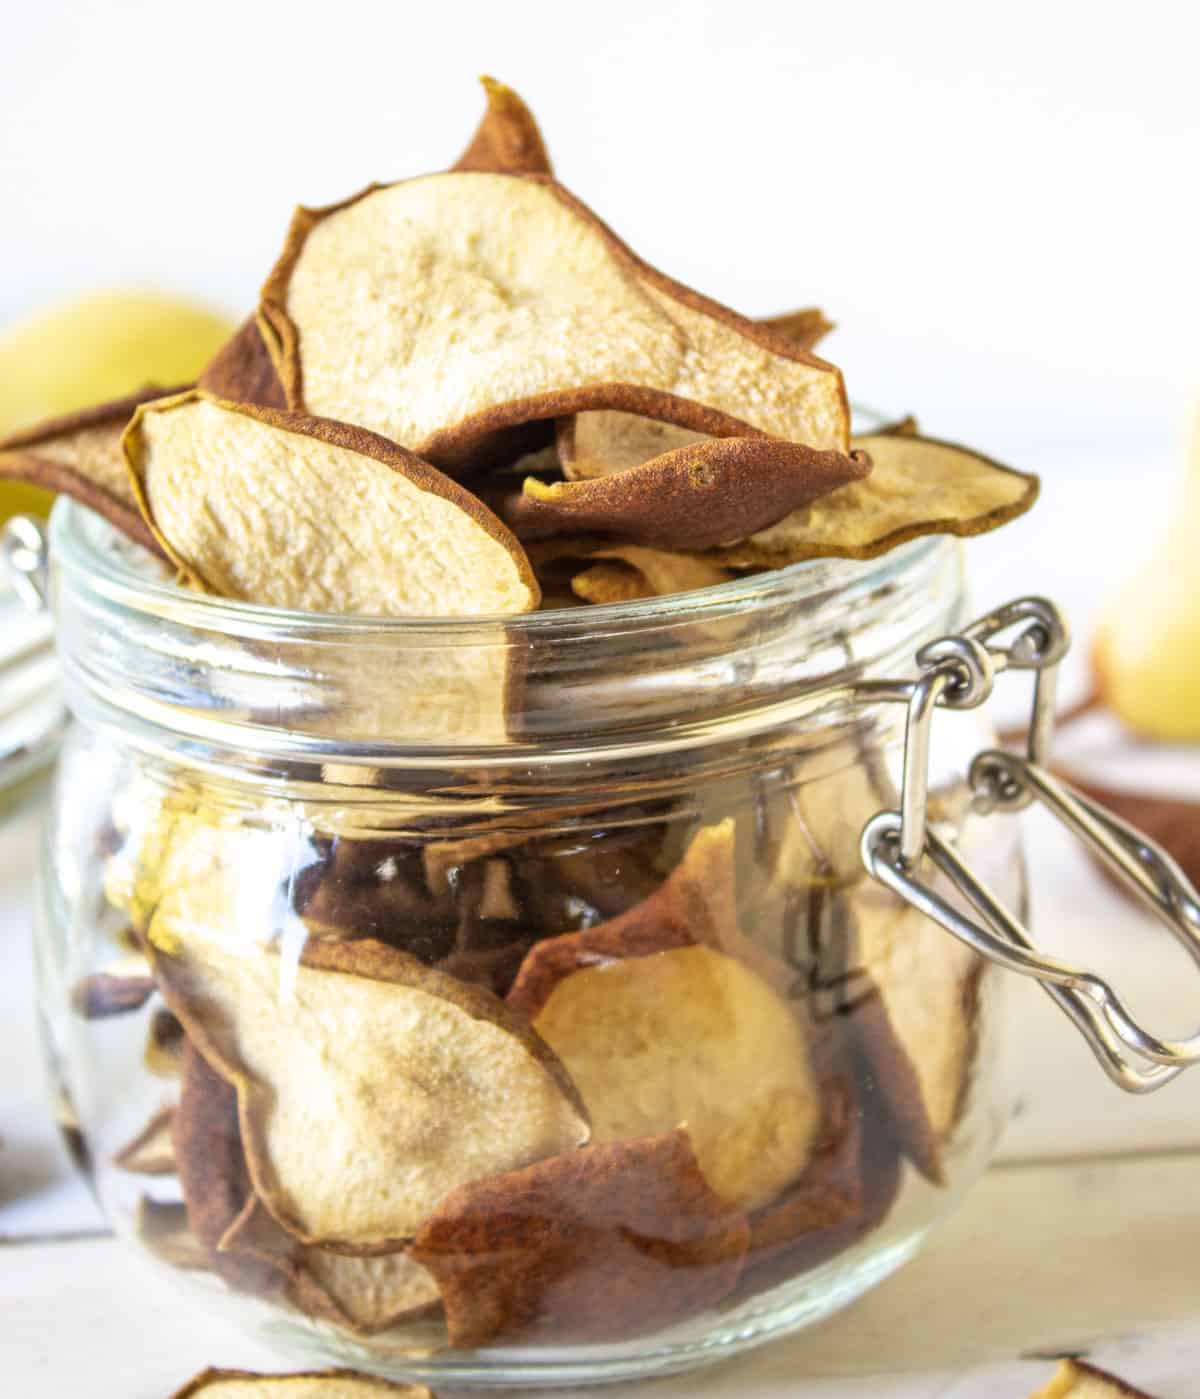 Dried pears in a glass crock.